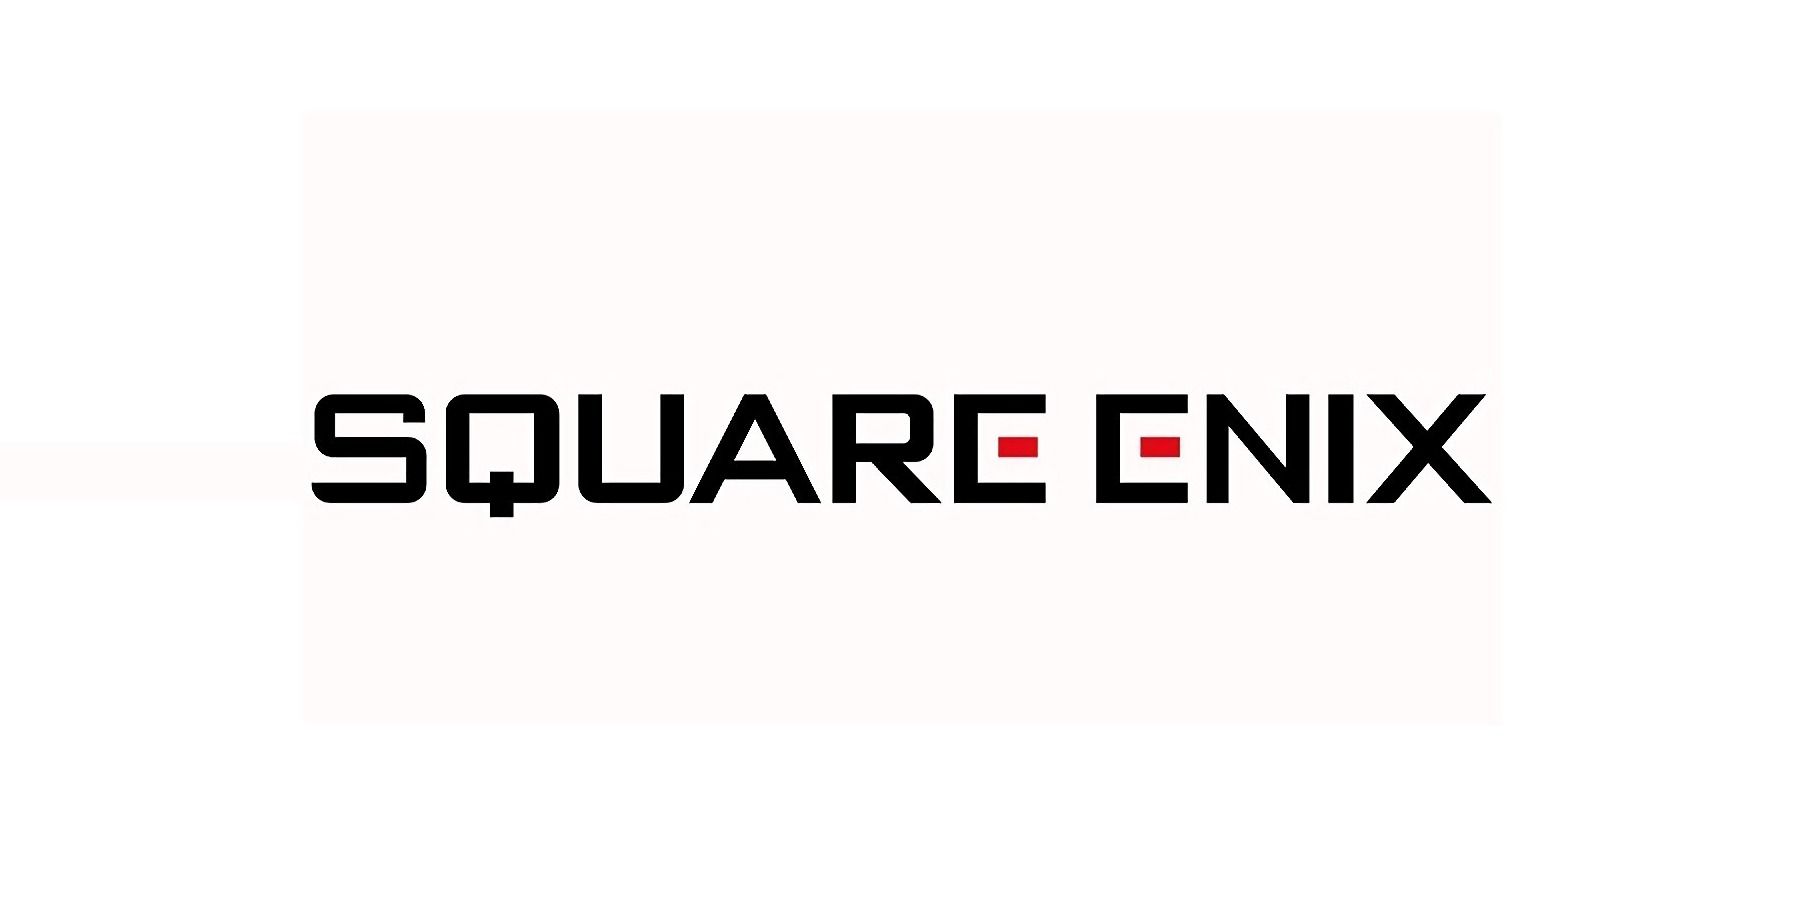 Square Enix is consolidating assets in preparation for a Sony